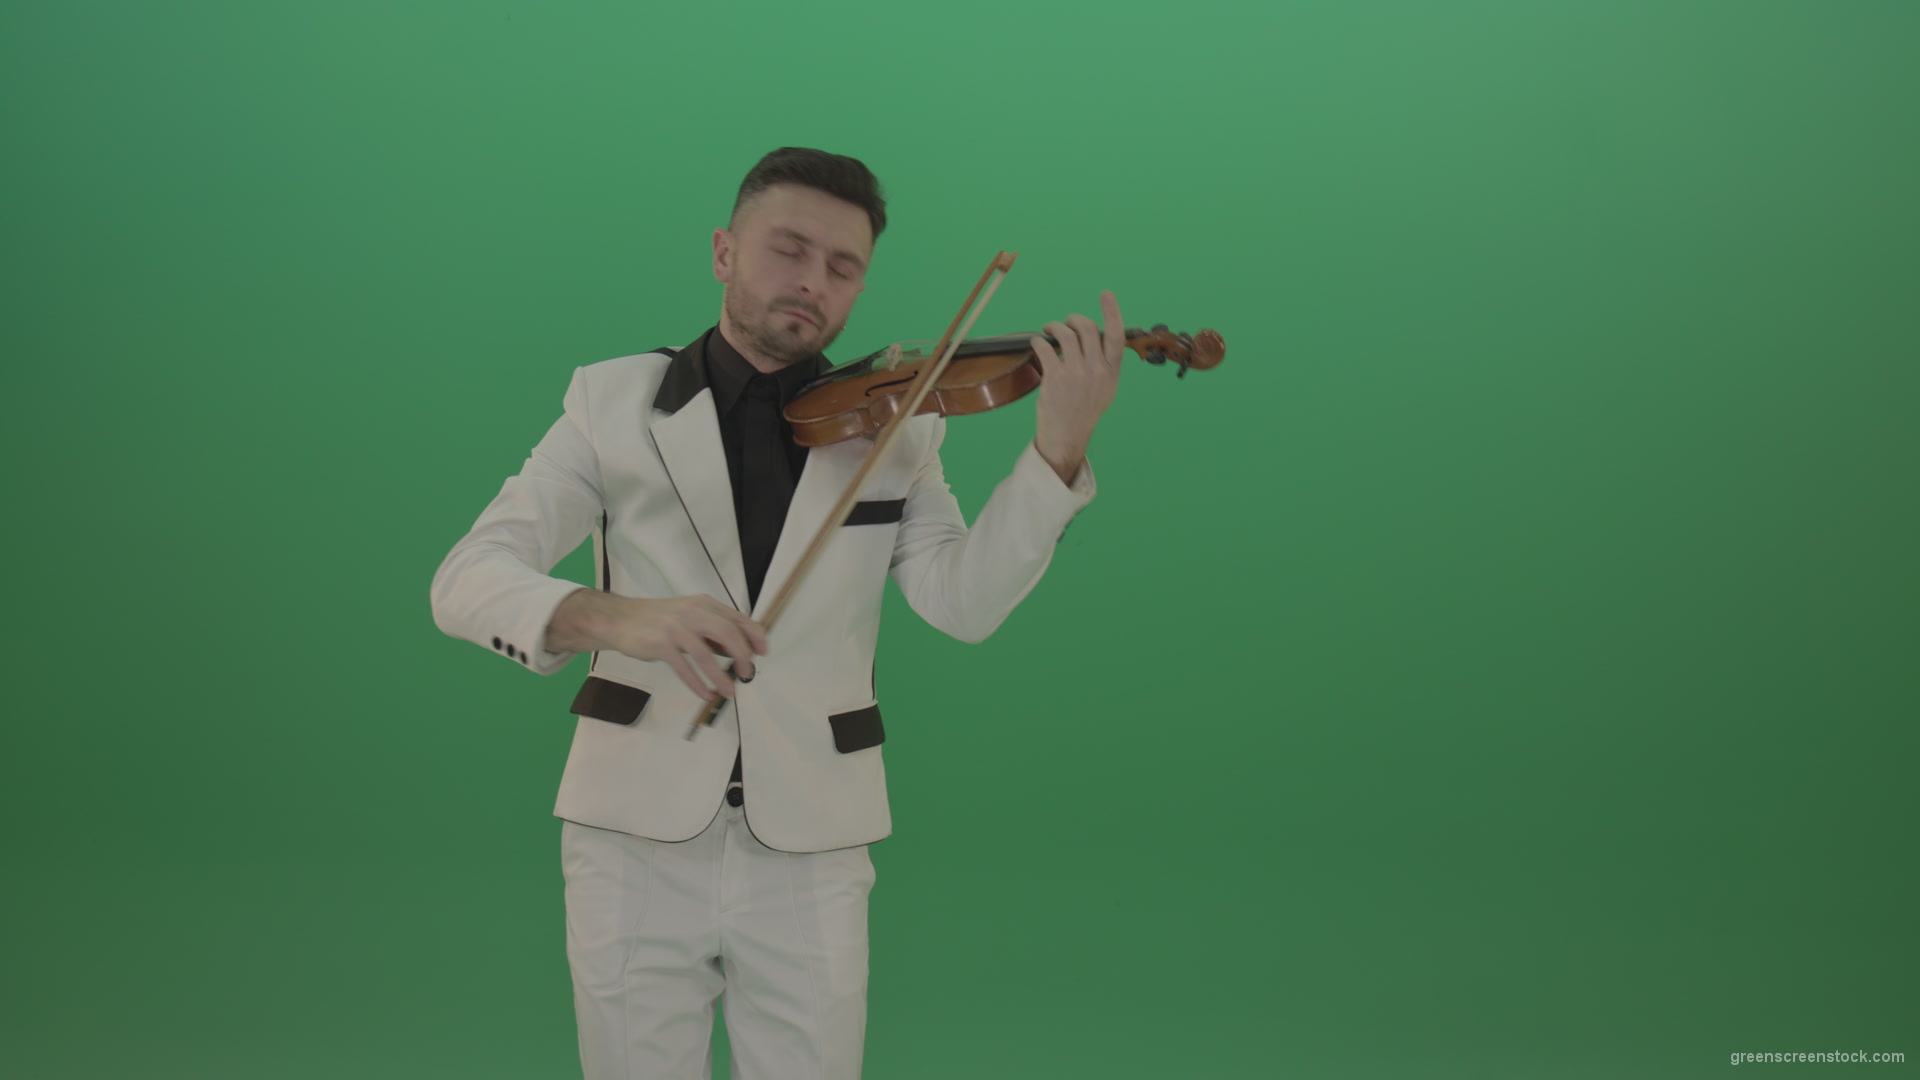 Man-is-playing-slow-love-in-white-costume-on-violin-Fiddle-string-music-instrument-isolated-on-green-screen_006 Green Screen Stock